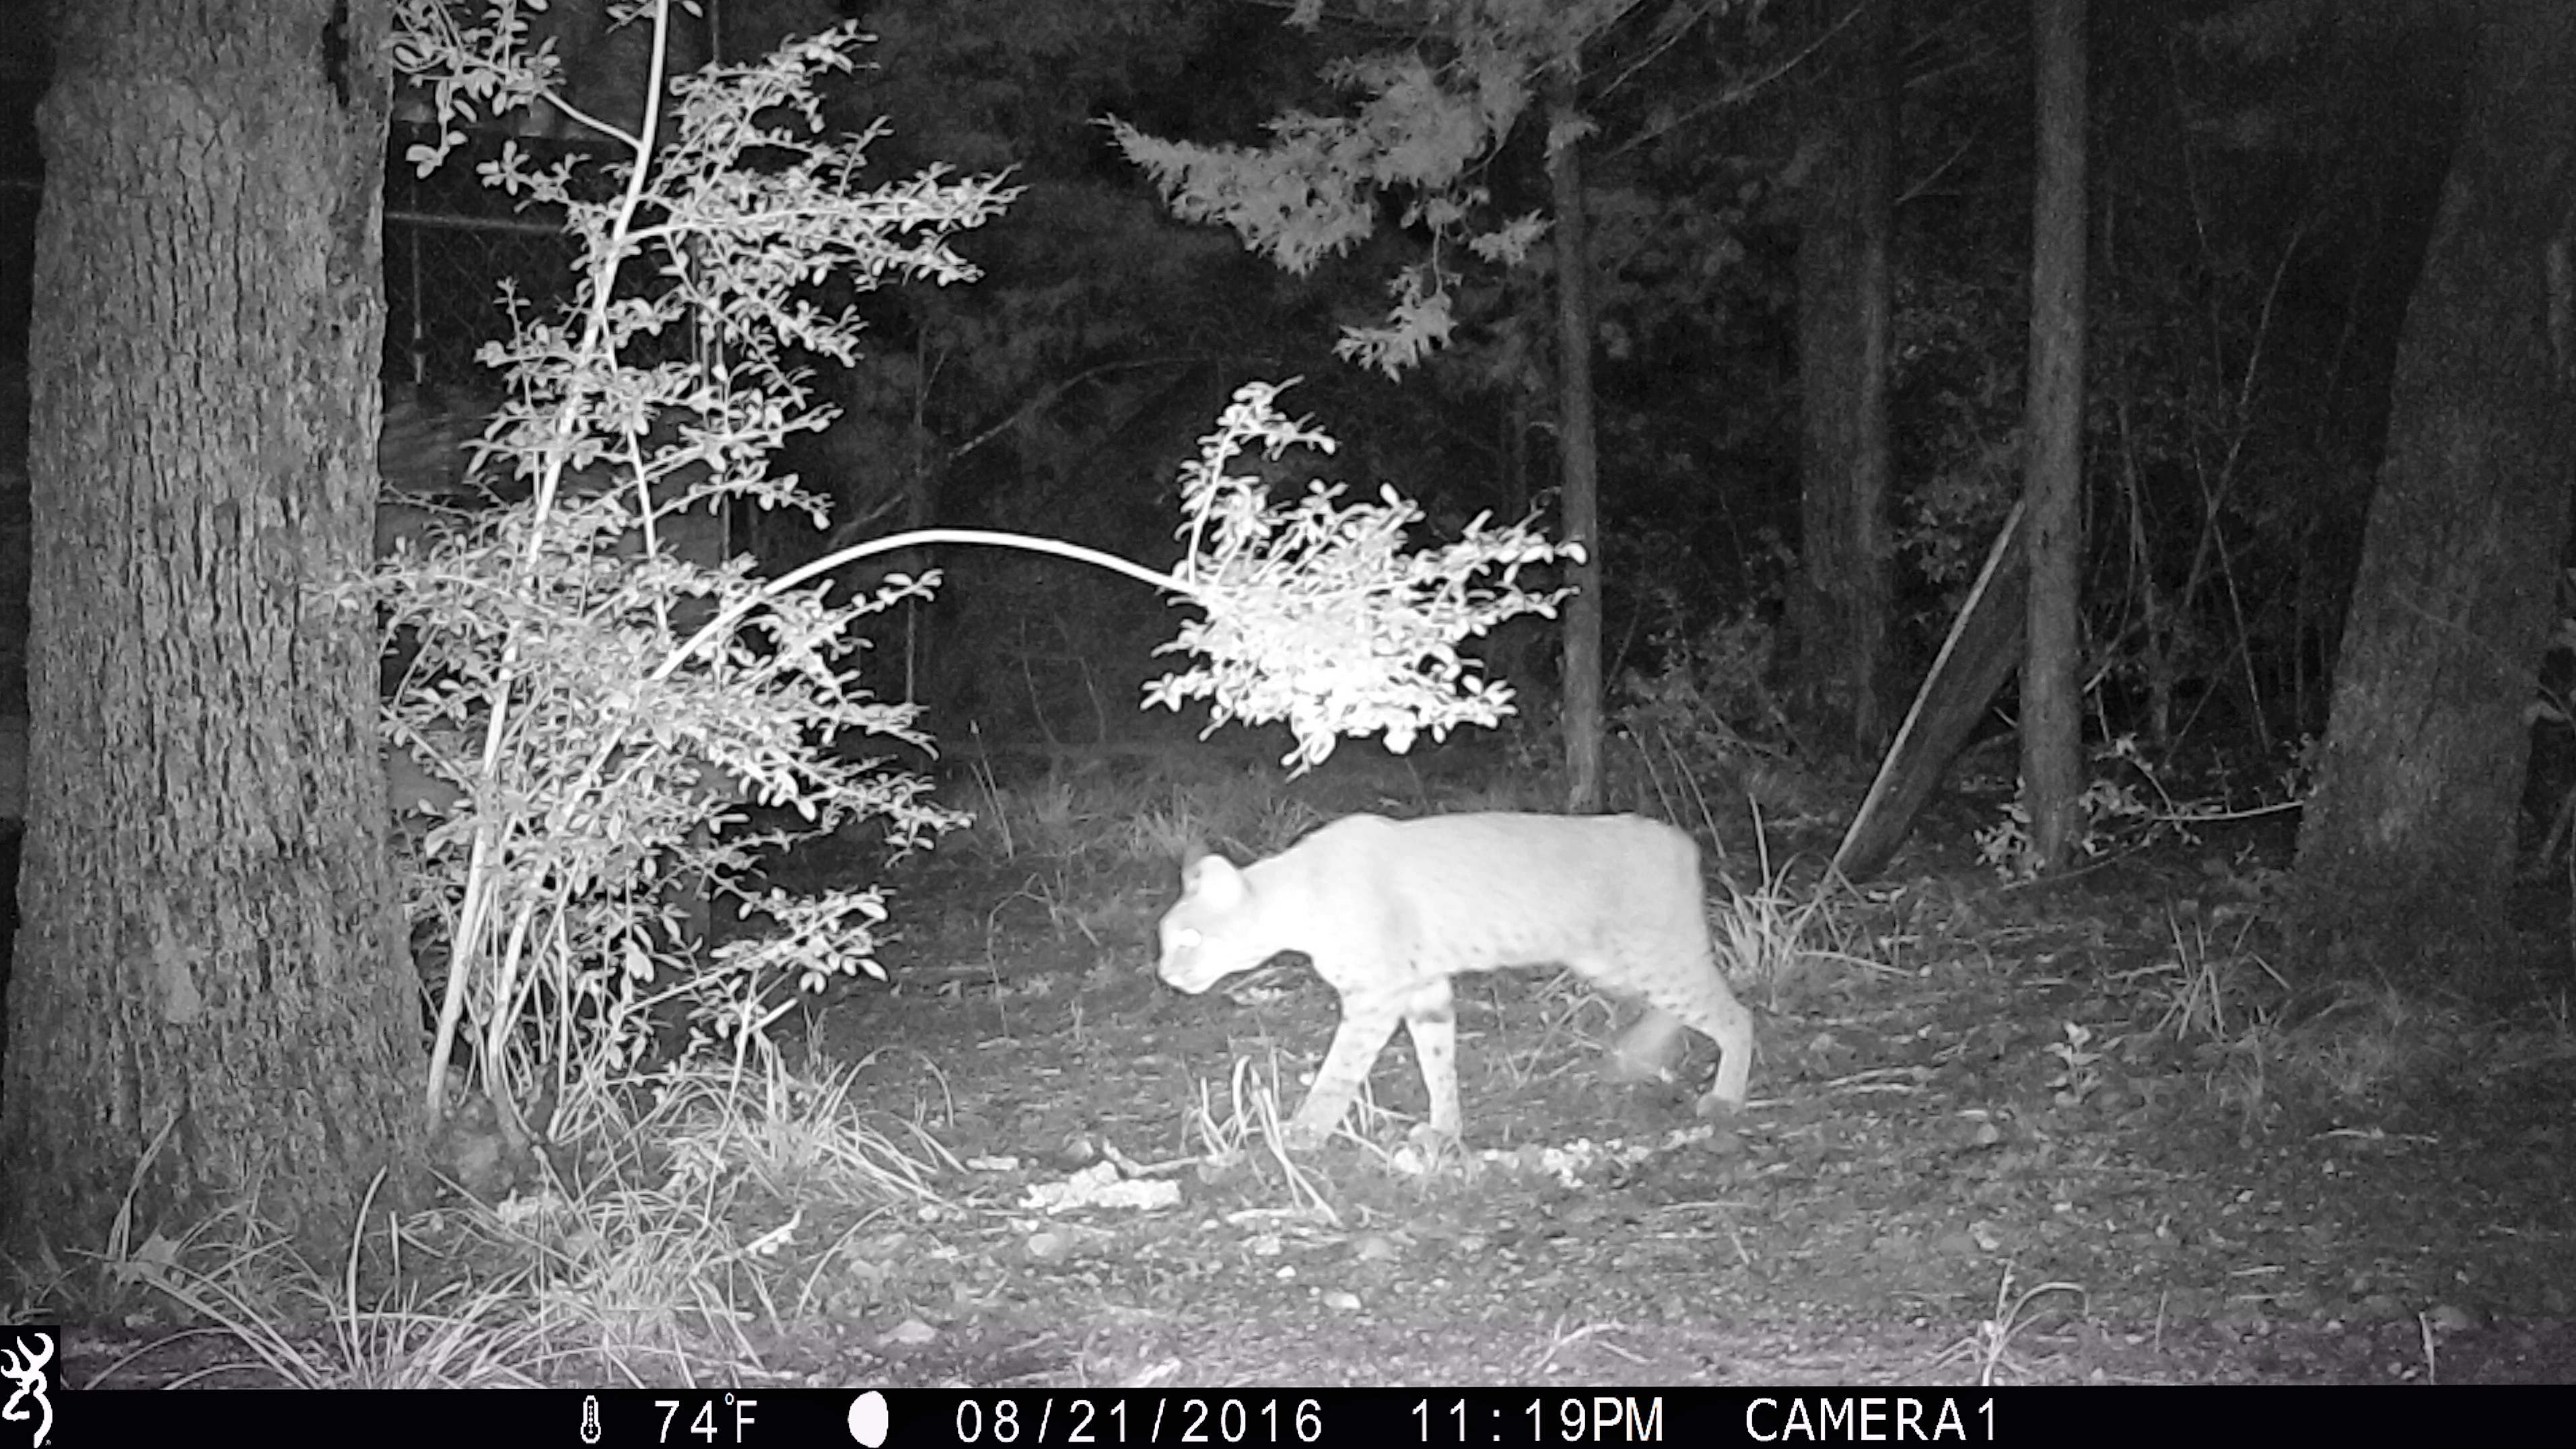 Caught on our game camera 8/21/2016